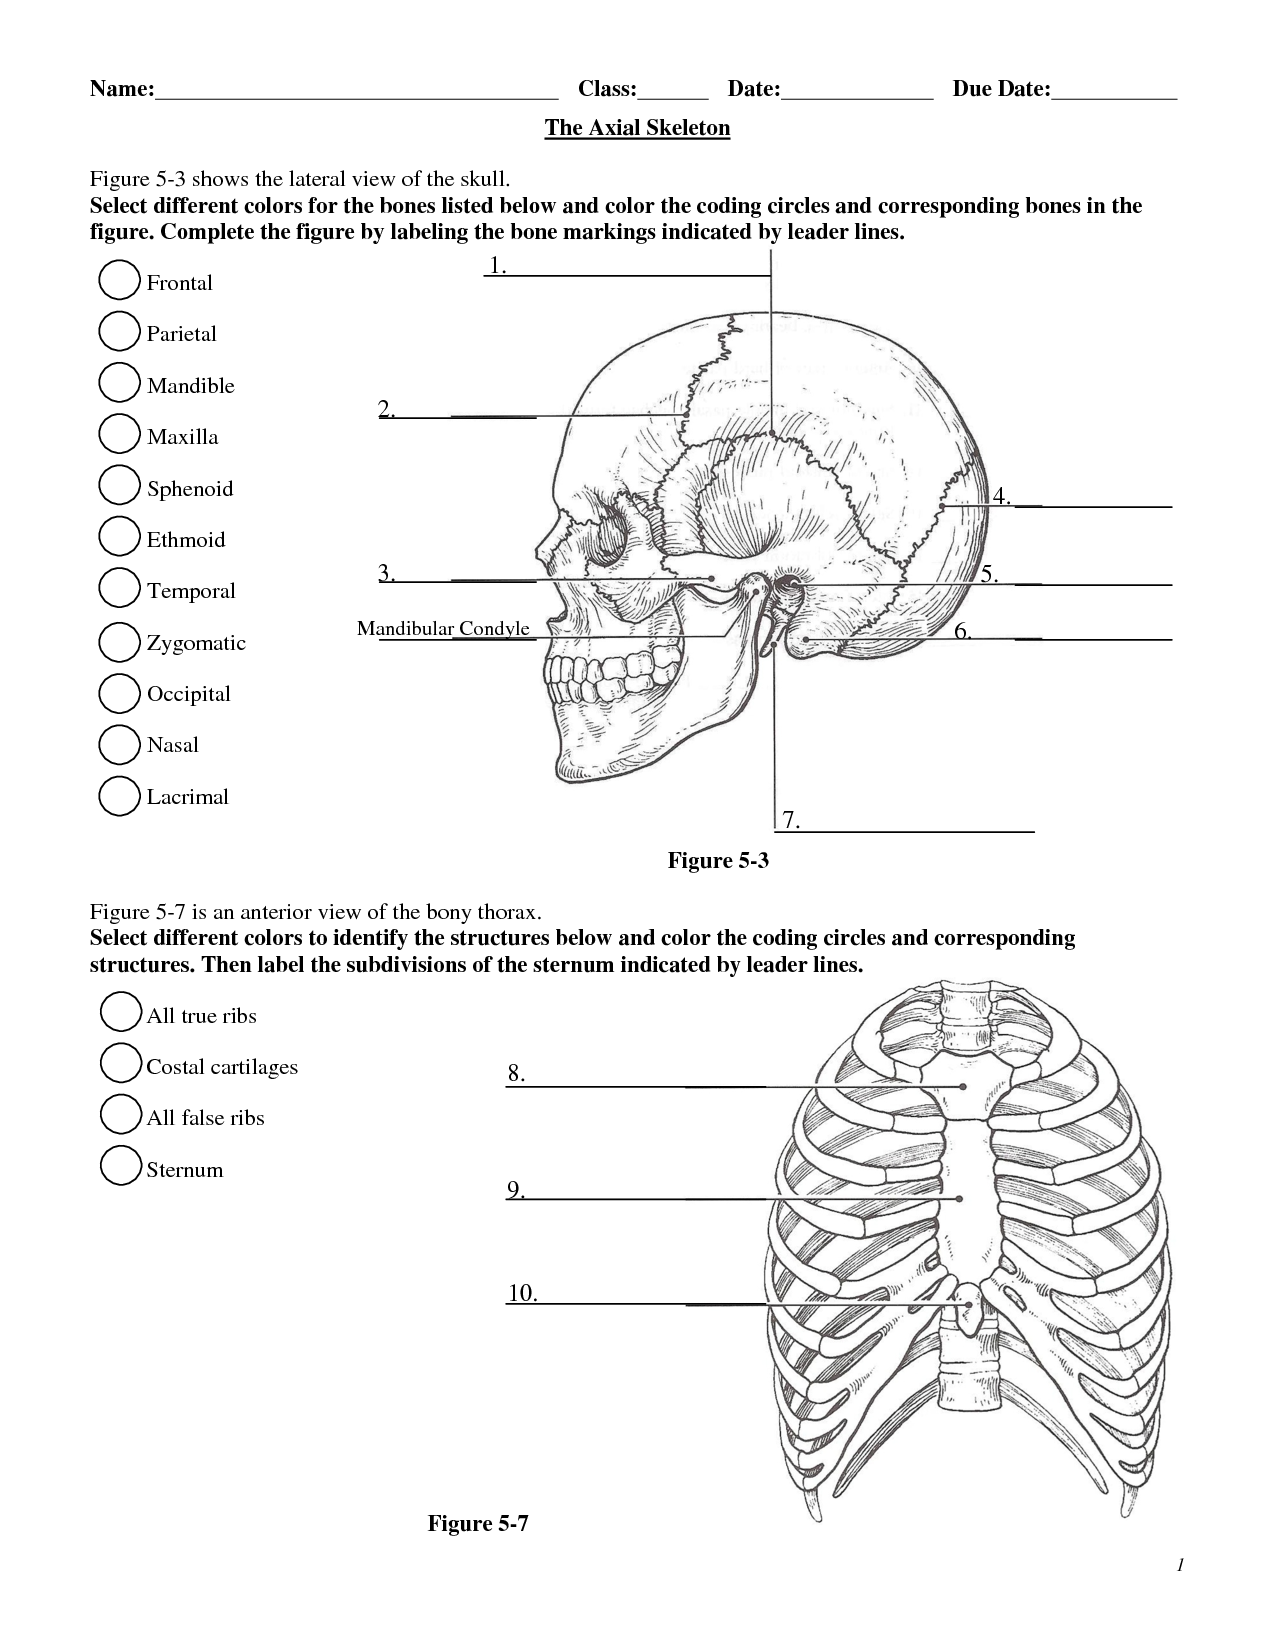 Labeling IS FUN Anatomy Coloring Book Anatomy And Physiology 